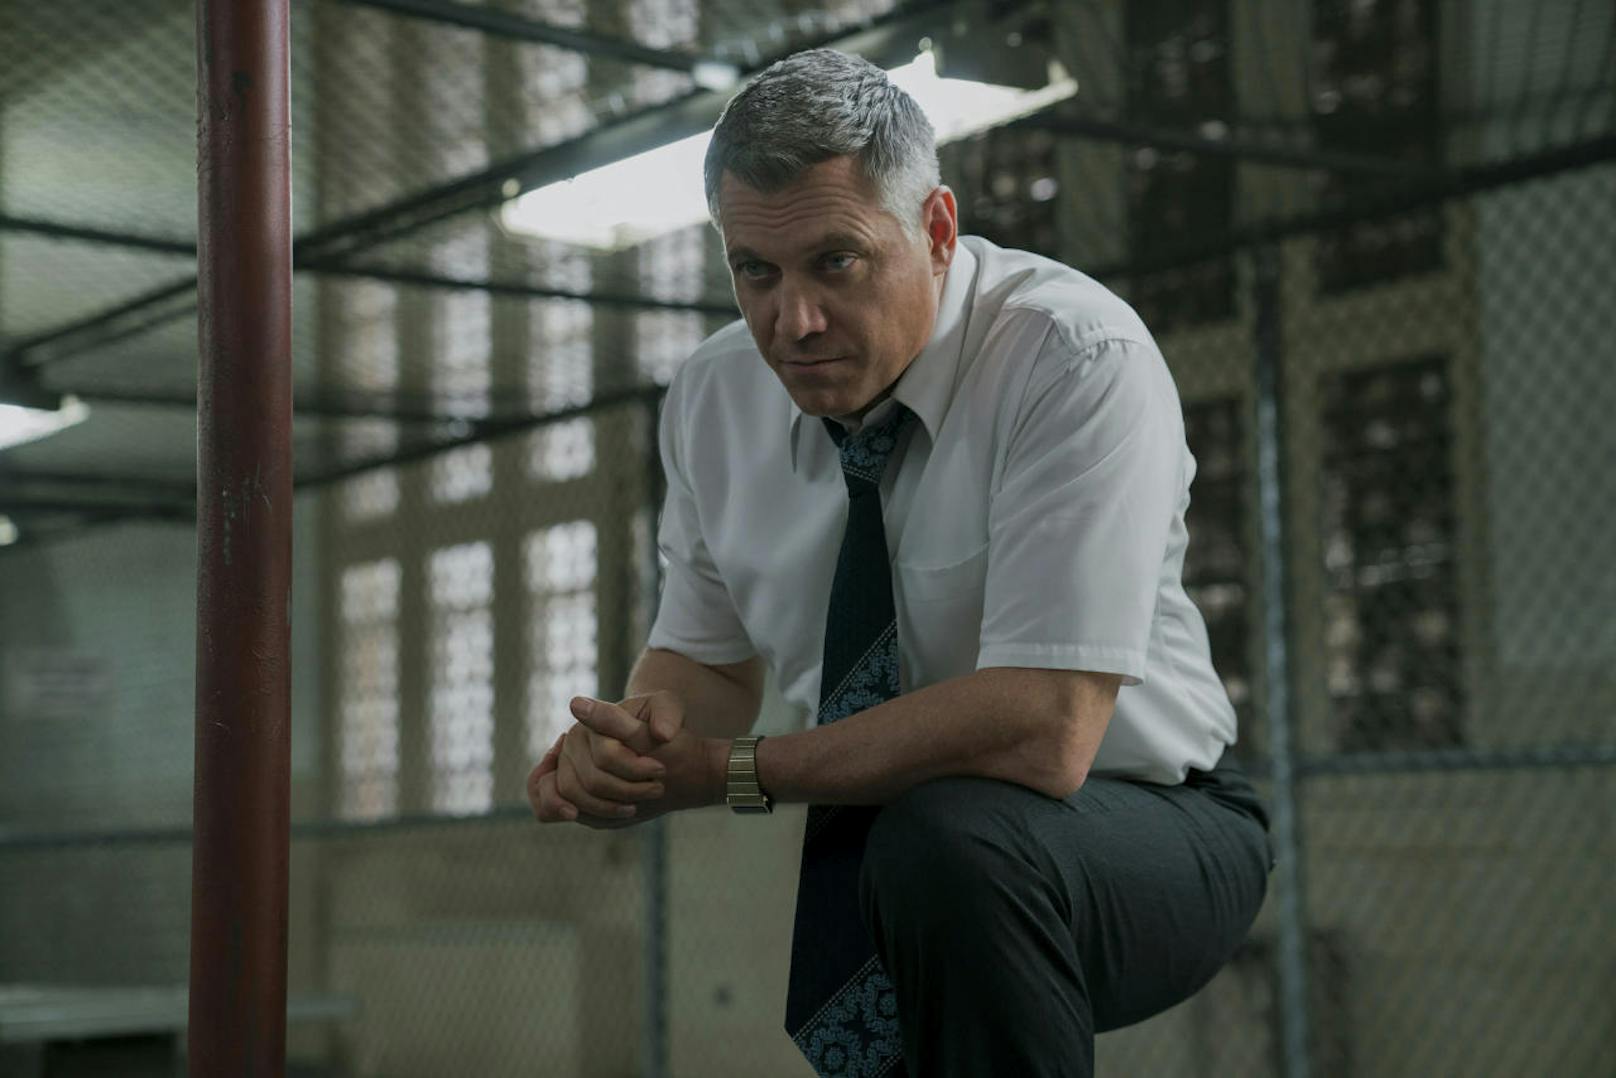 Holt McCallany als Bill Tench in "Mindhunter".